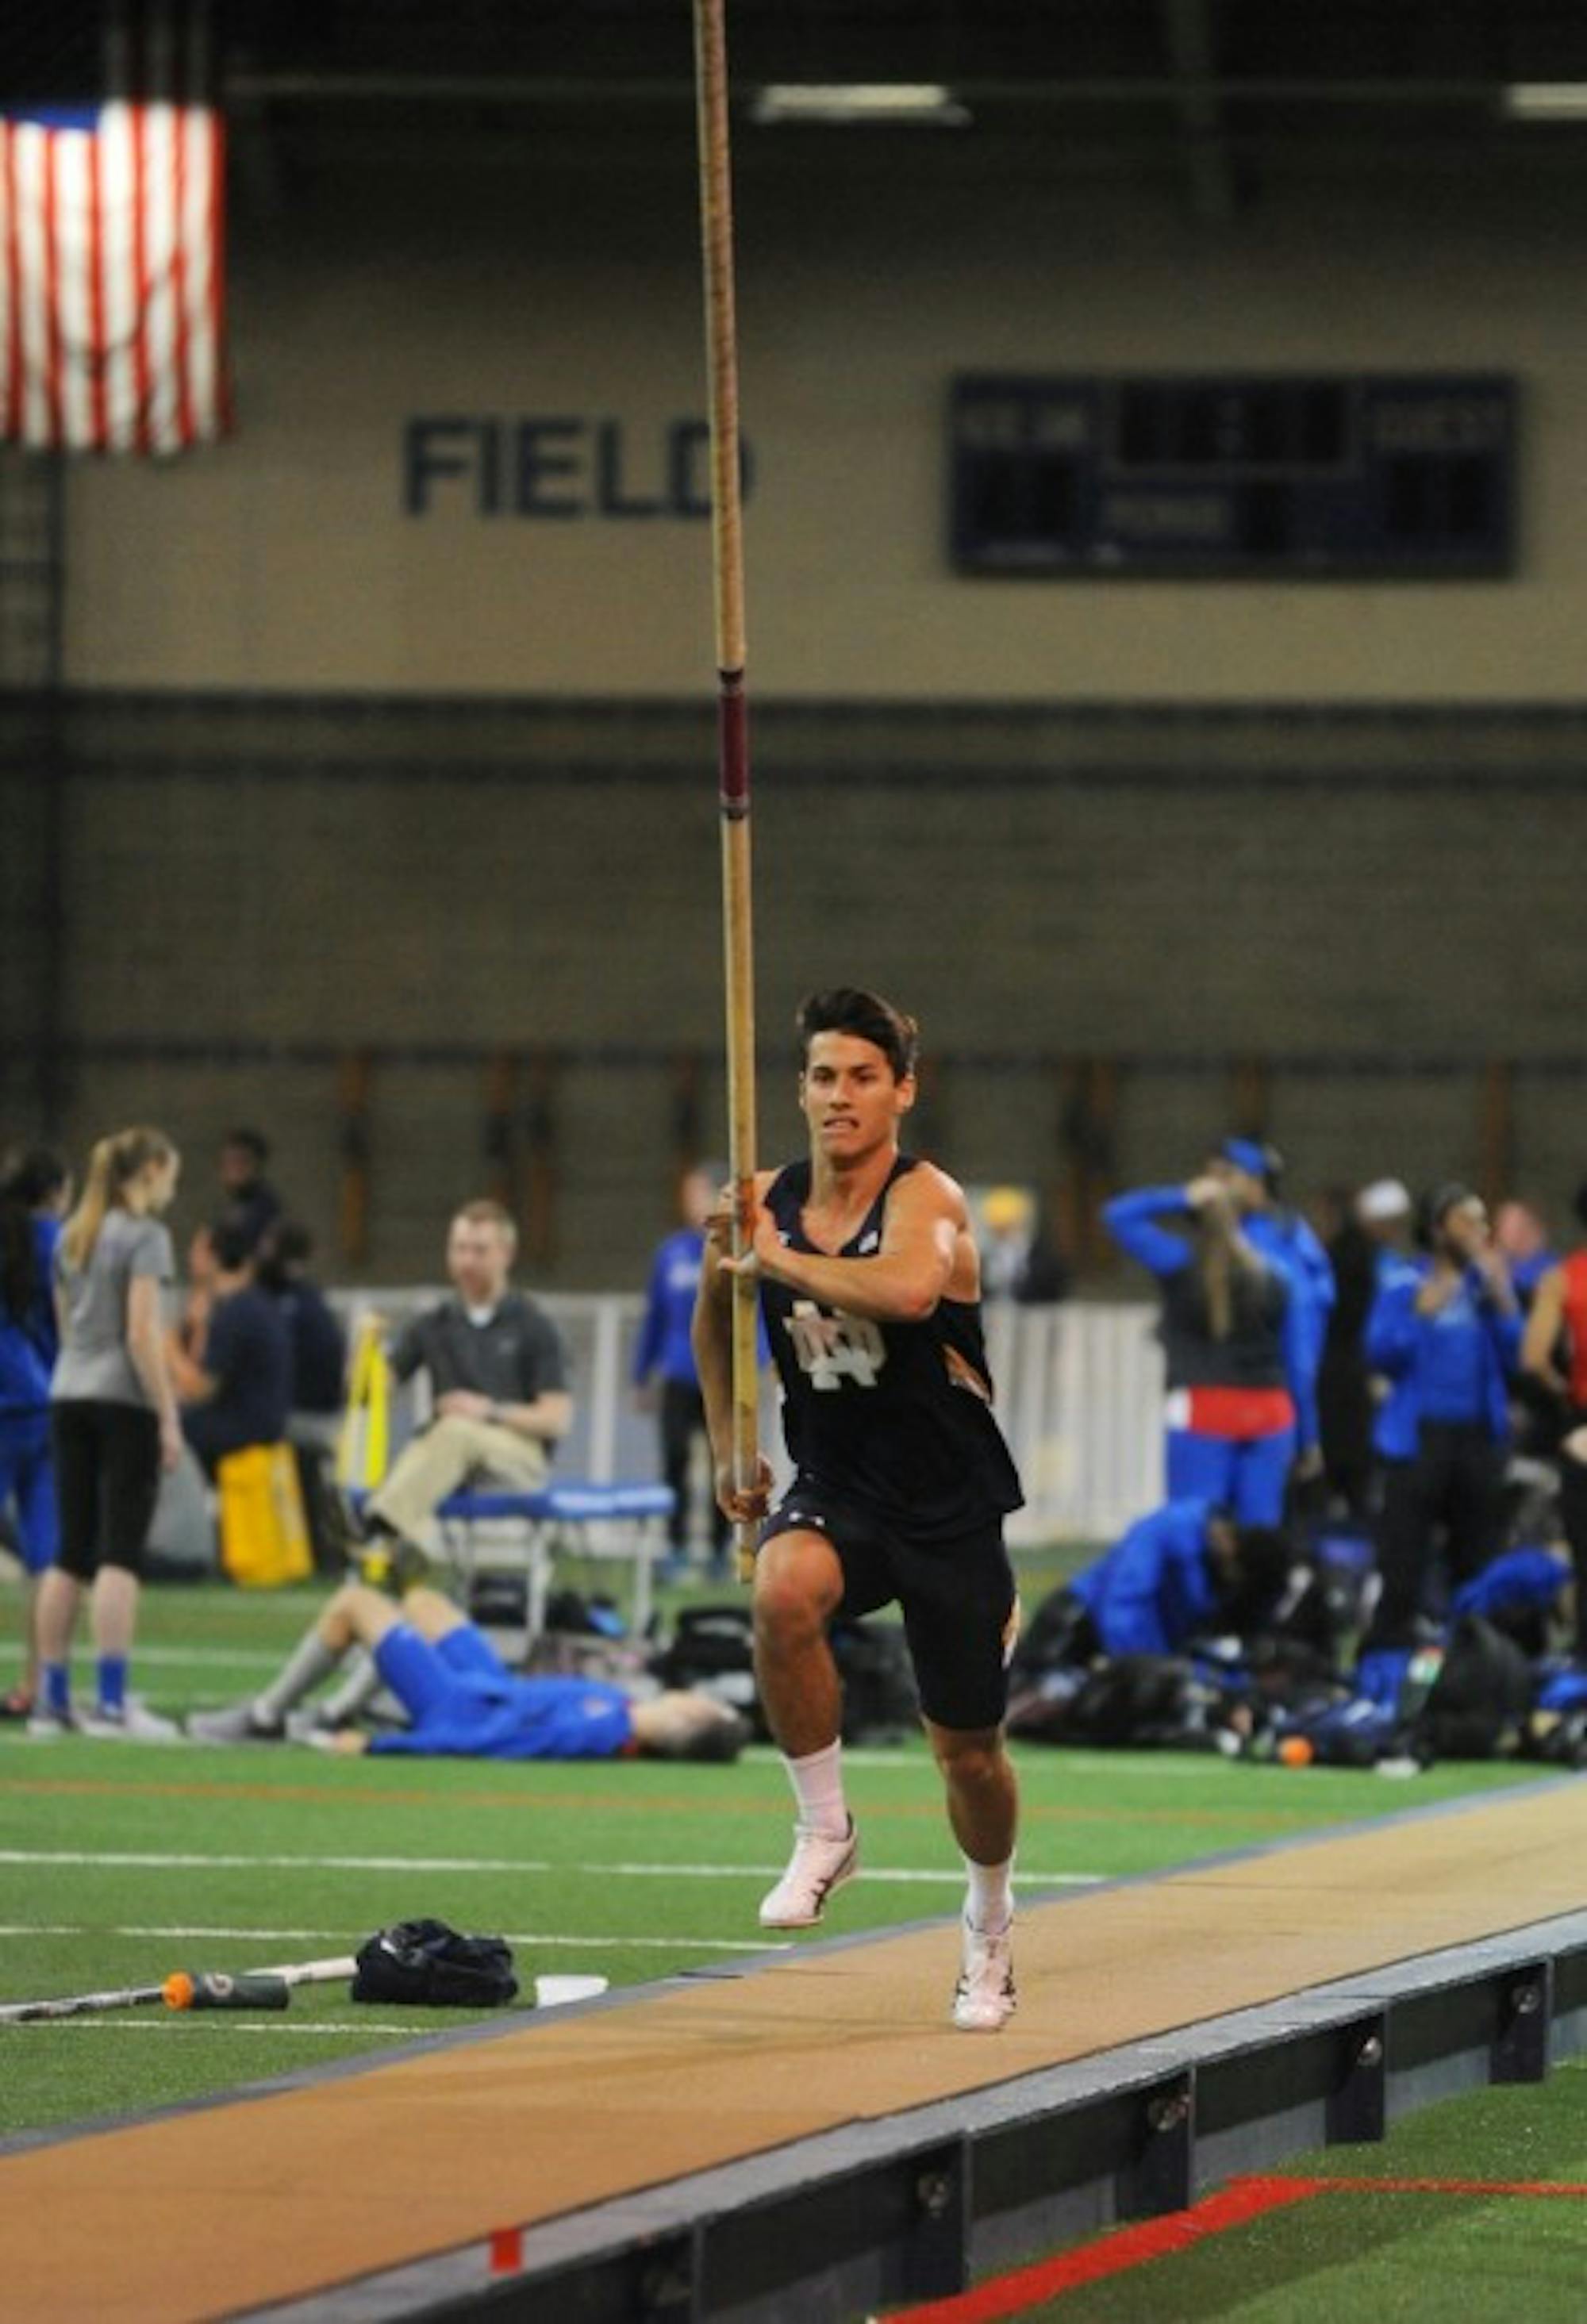 Irish freshman pole vaulter Landon Shank runs toward the bar during the Blue & Gold Invitational on Dec. 2. Shank finished third in the event finals after clearing a 4.70 meter jump.